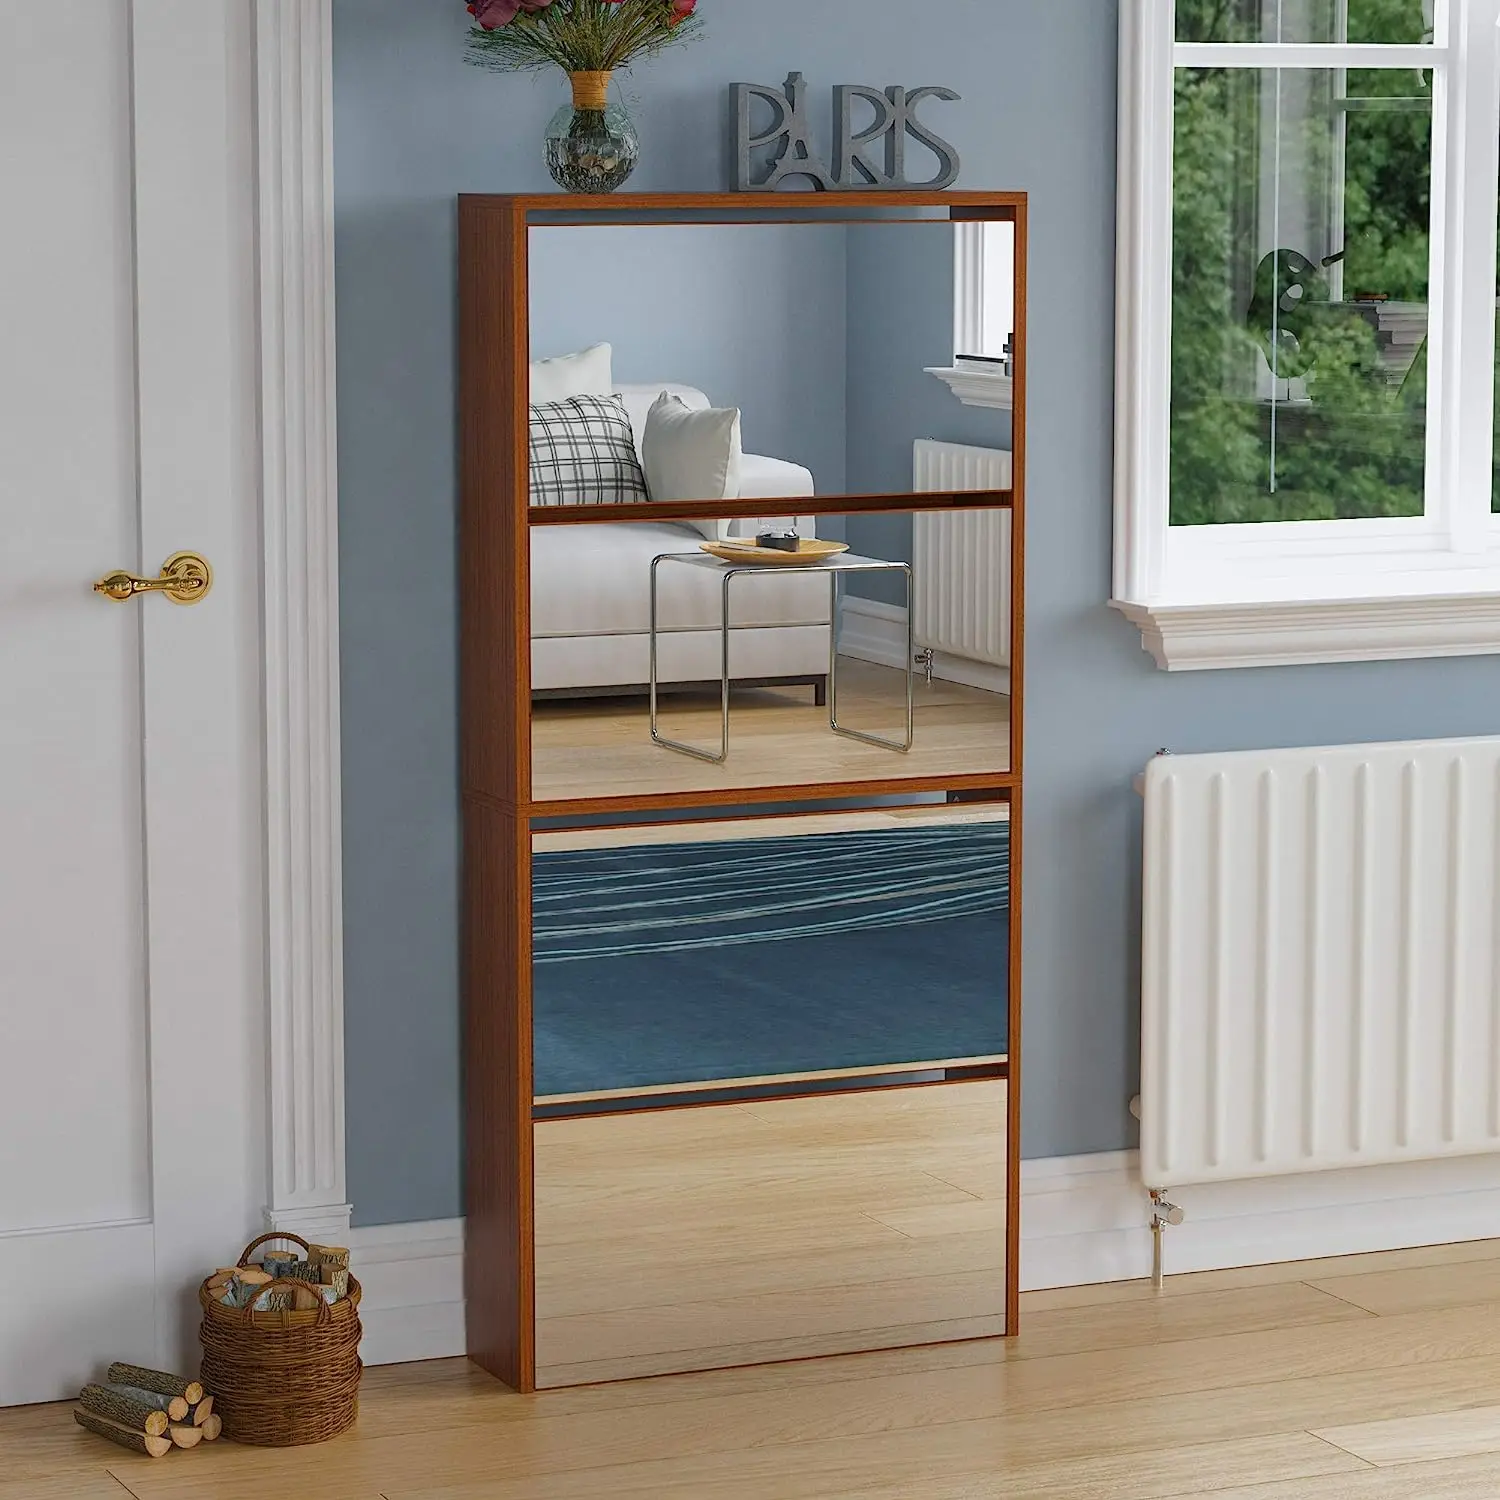 Minimalism wooden design shoe rack side board with 2 doors and mirror for living room furniture